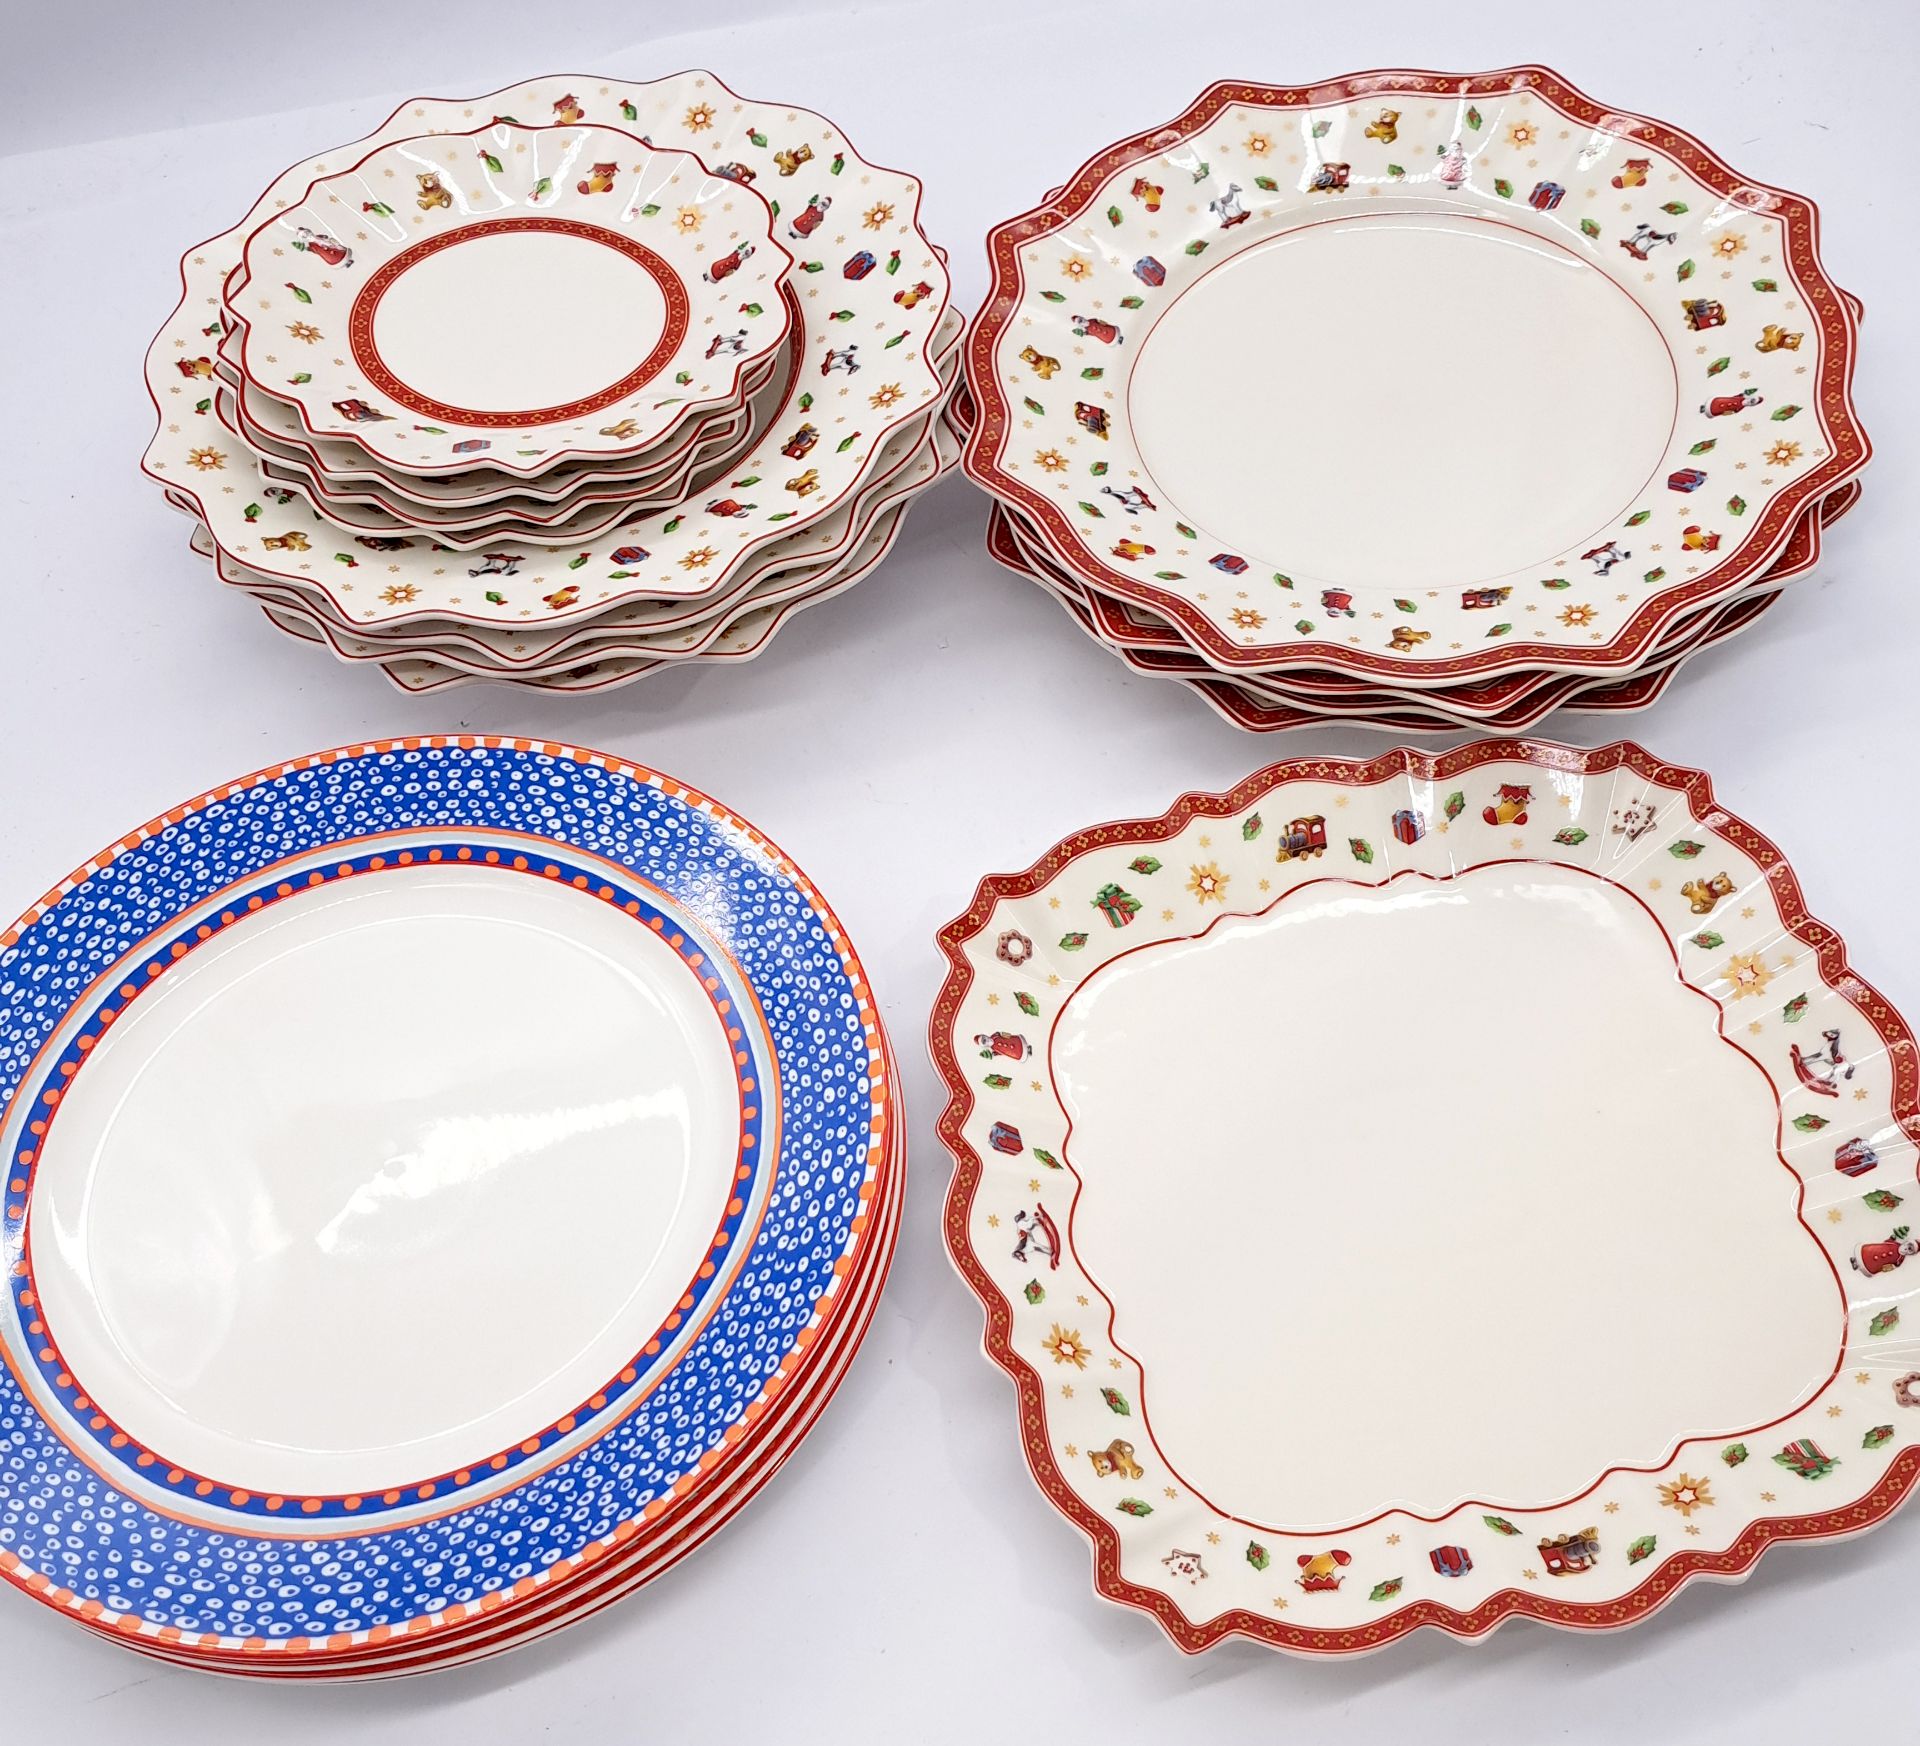 Villeroy and Boch collection of porcelain plates and saucers, plus Oilily plates